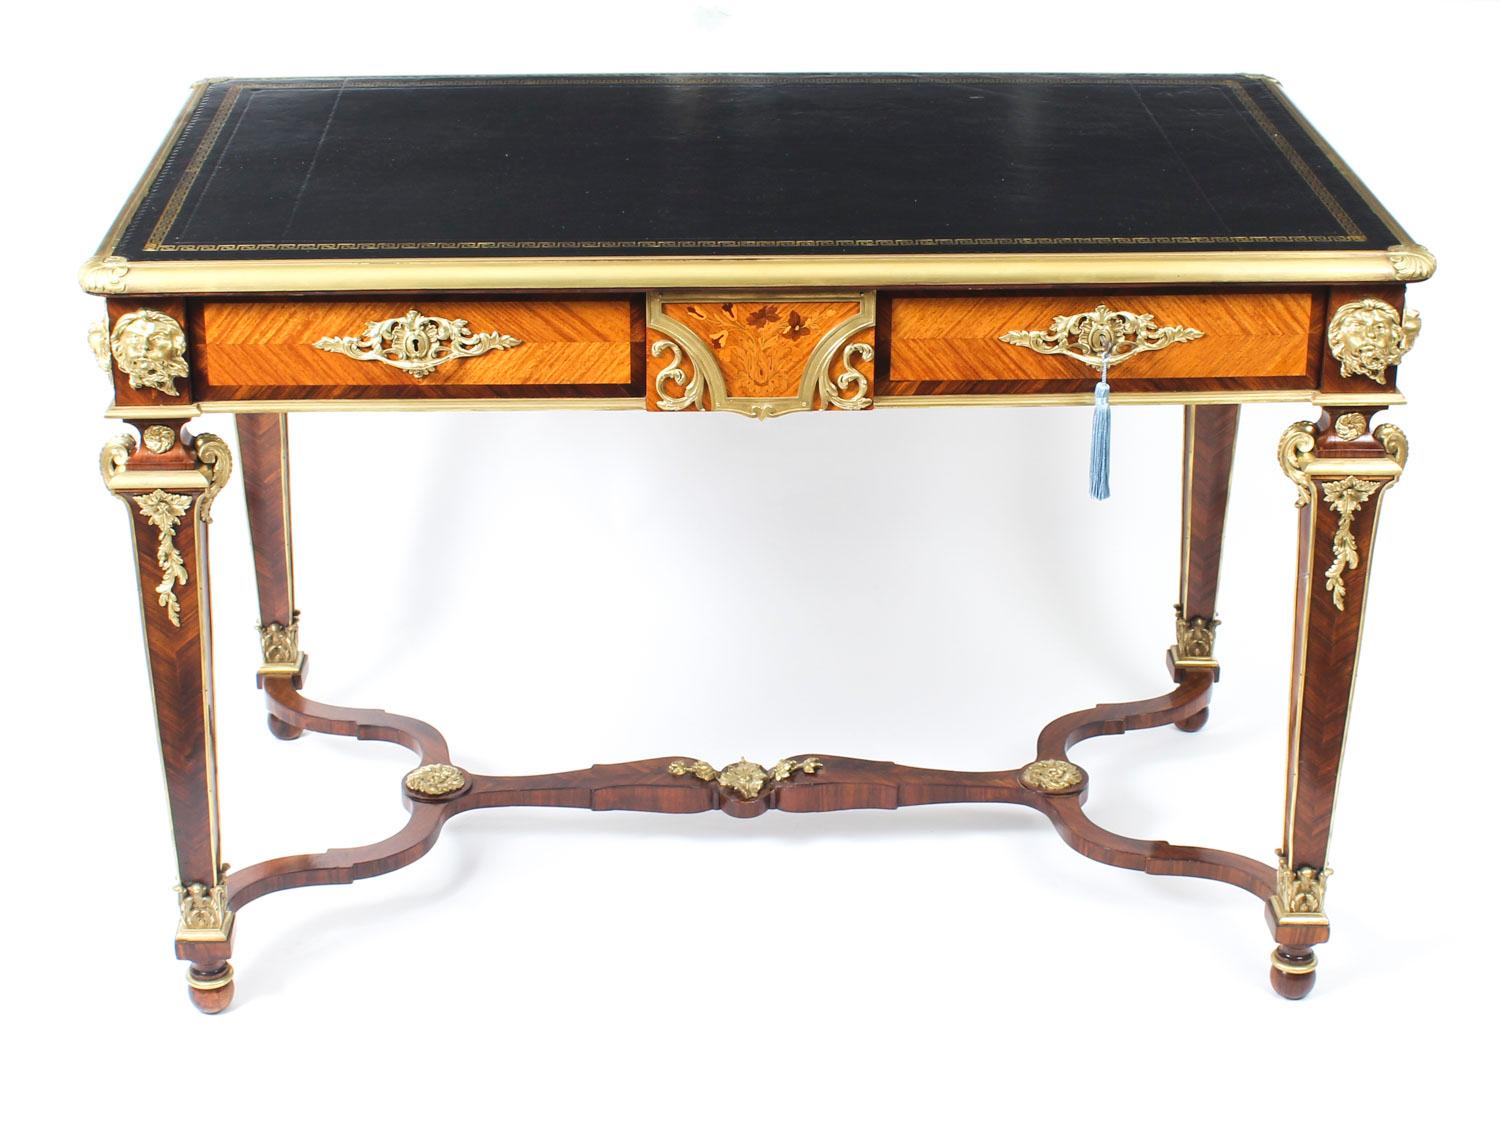 A superb antique 19th century French kingwood, marquetry and ormolu mounted bureau plat, circa 1860 in date.

The rectangular top with ormolu border and fitted with a striking gold tooled black leather writing surface. The decorative frieze with